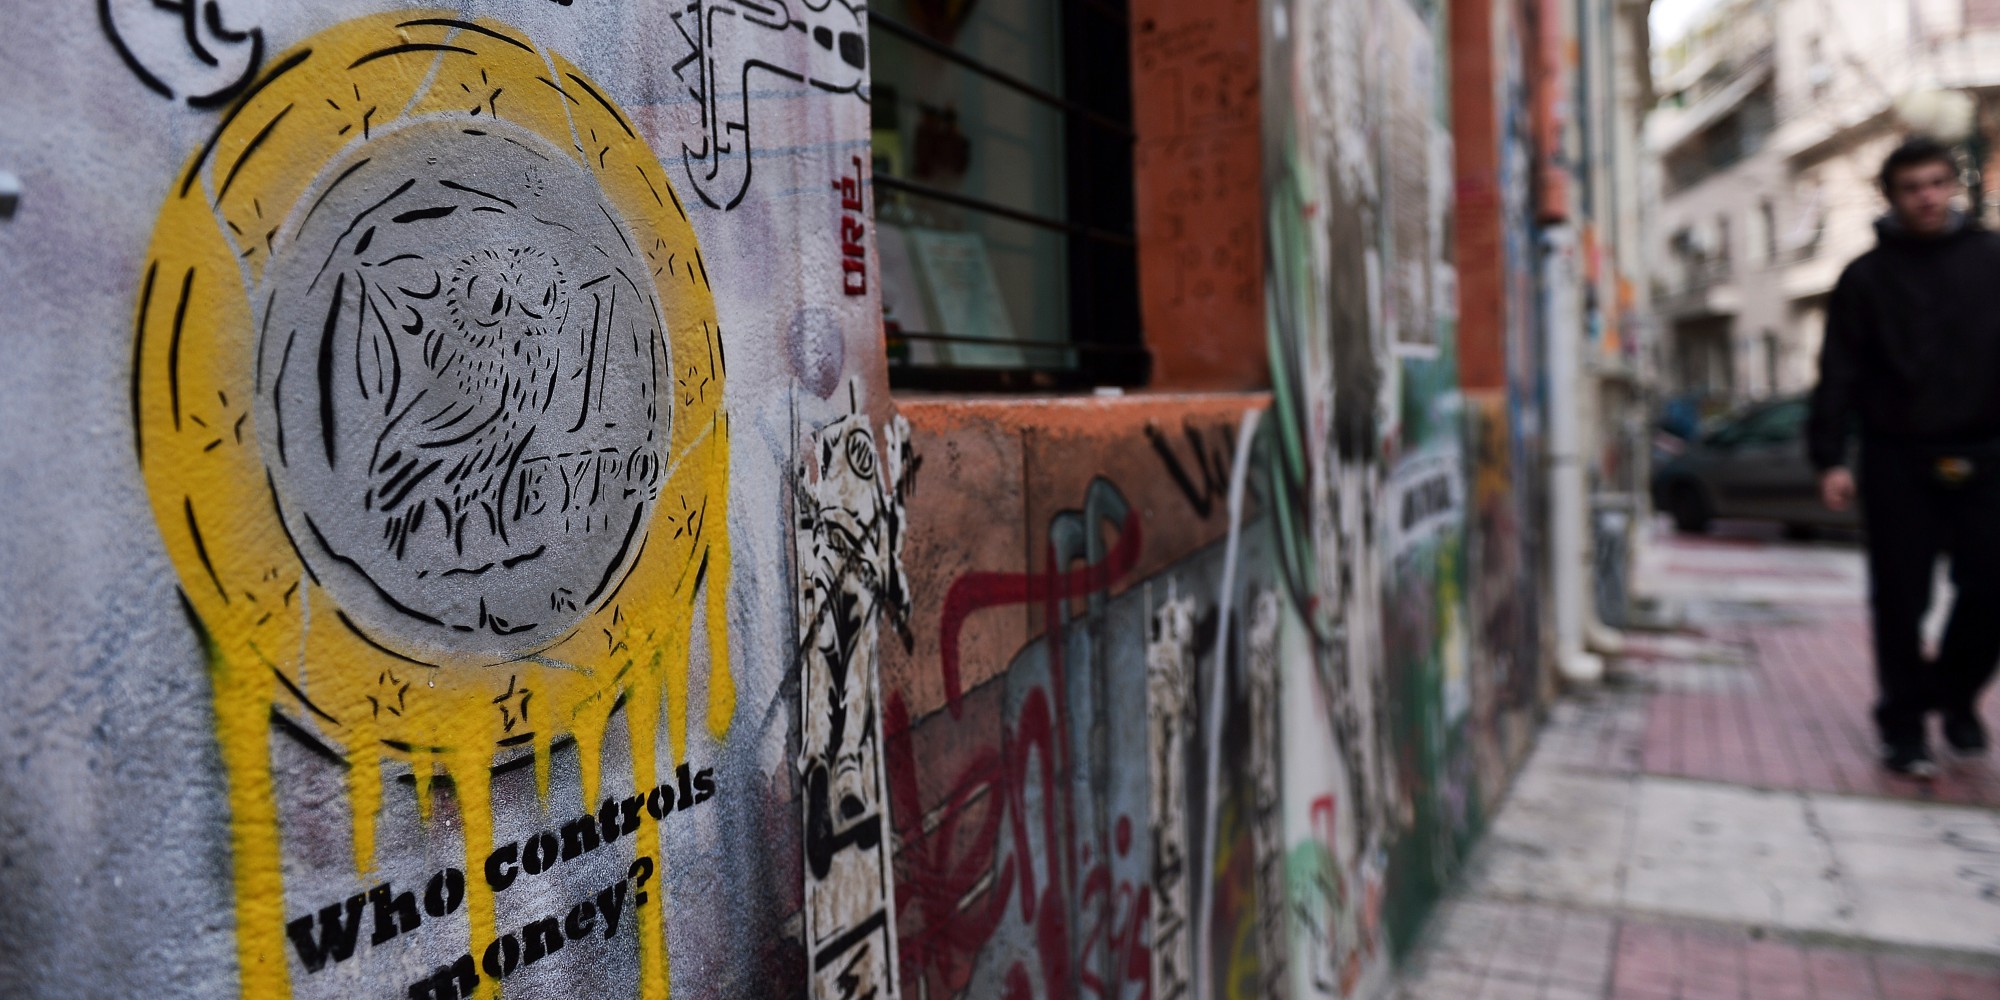 A graffiti in the center of Athens, depicting a Greek euro coin, is seen on February 4, 2015. Greek Finance Minister Yanis Varoufakis told Italian newspaper Il Messaggero in an interview published on February 4 that Athens needed up to six weeks to draw up a global economic plan, as it lobbies its European allies to win backing for debt relief proposals.                        AFP PHOTO/ LOUISA GOULIAMAKI        (Photo credit should read LOUISA GOULIAMAKI/AFP/Getty Images)